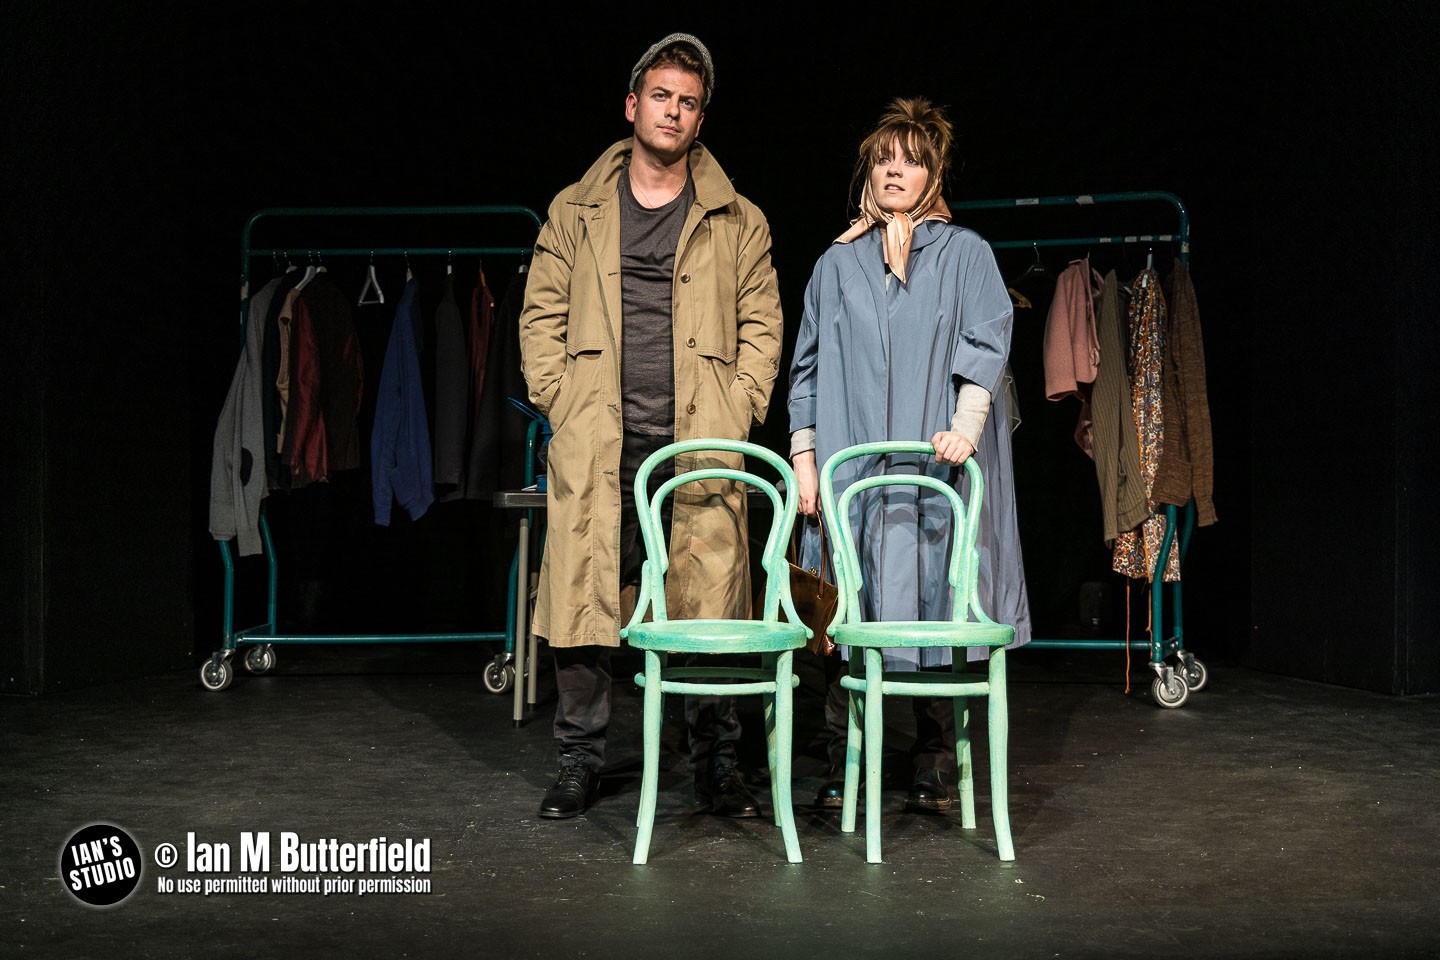 A couple on stage infront of 2 green clothes rails and behind 2 green bentwood chairs